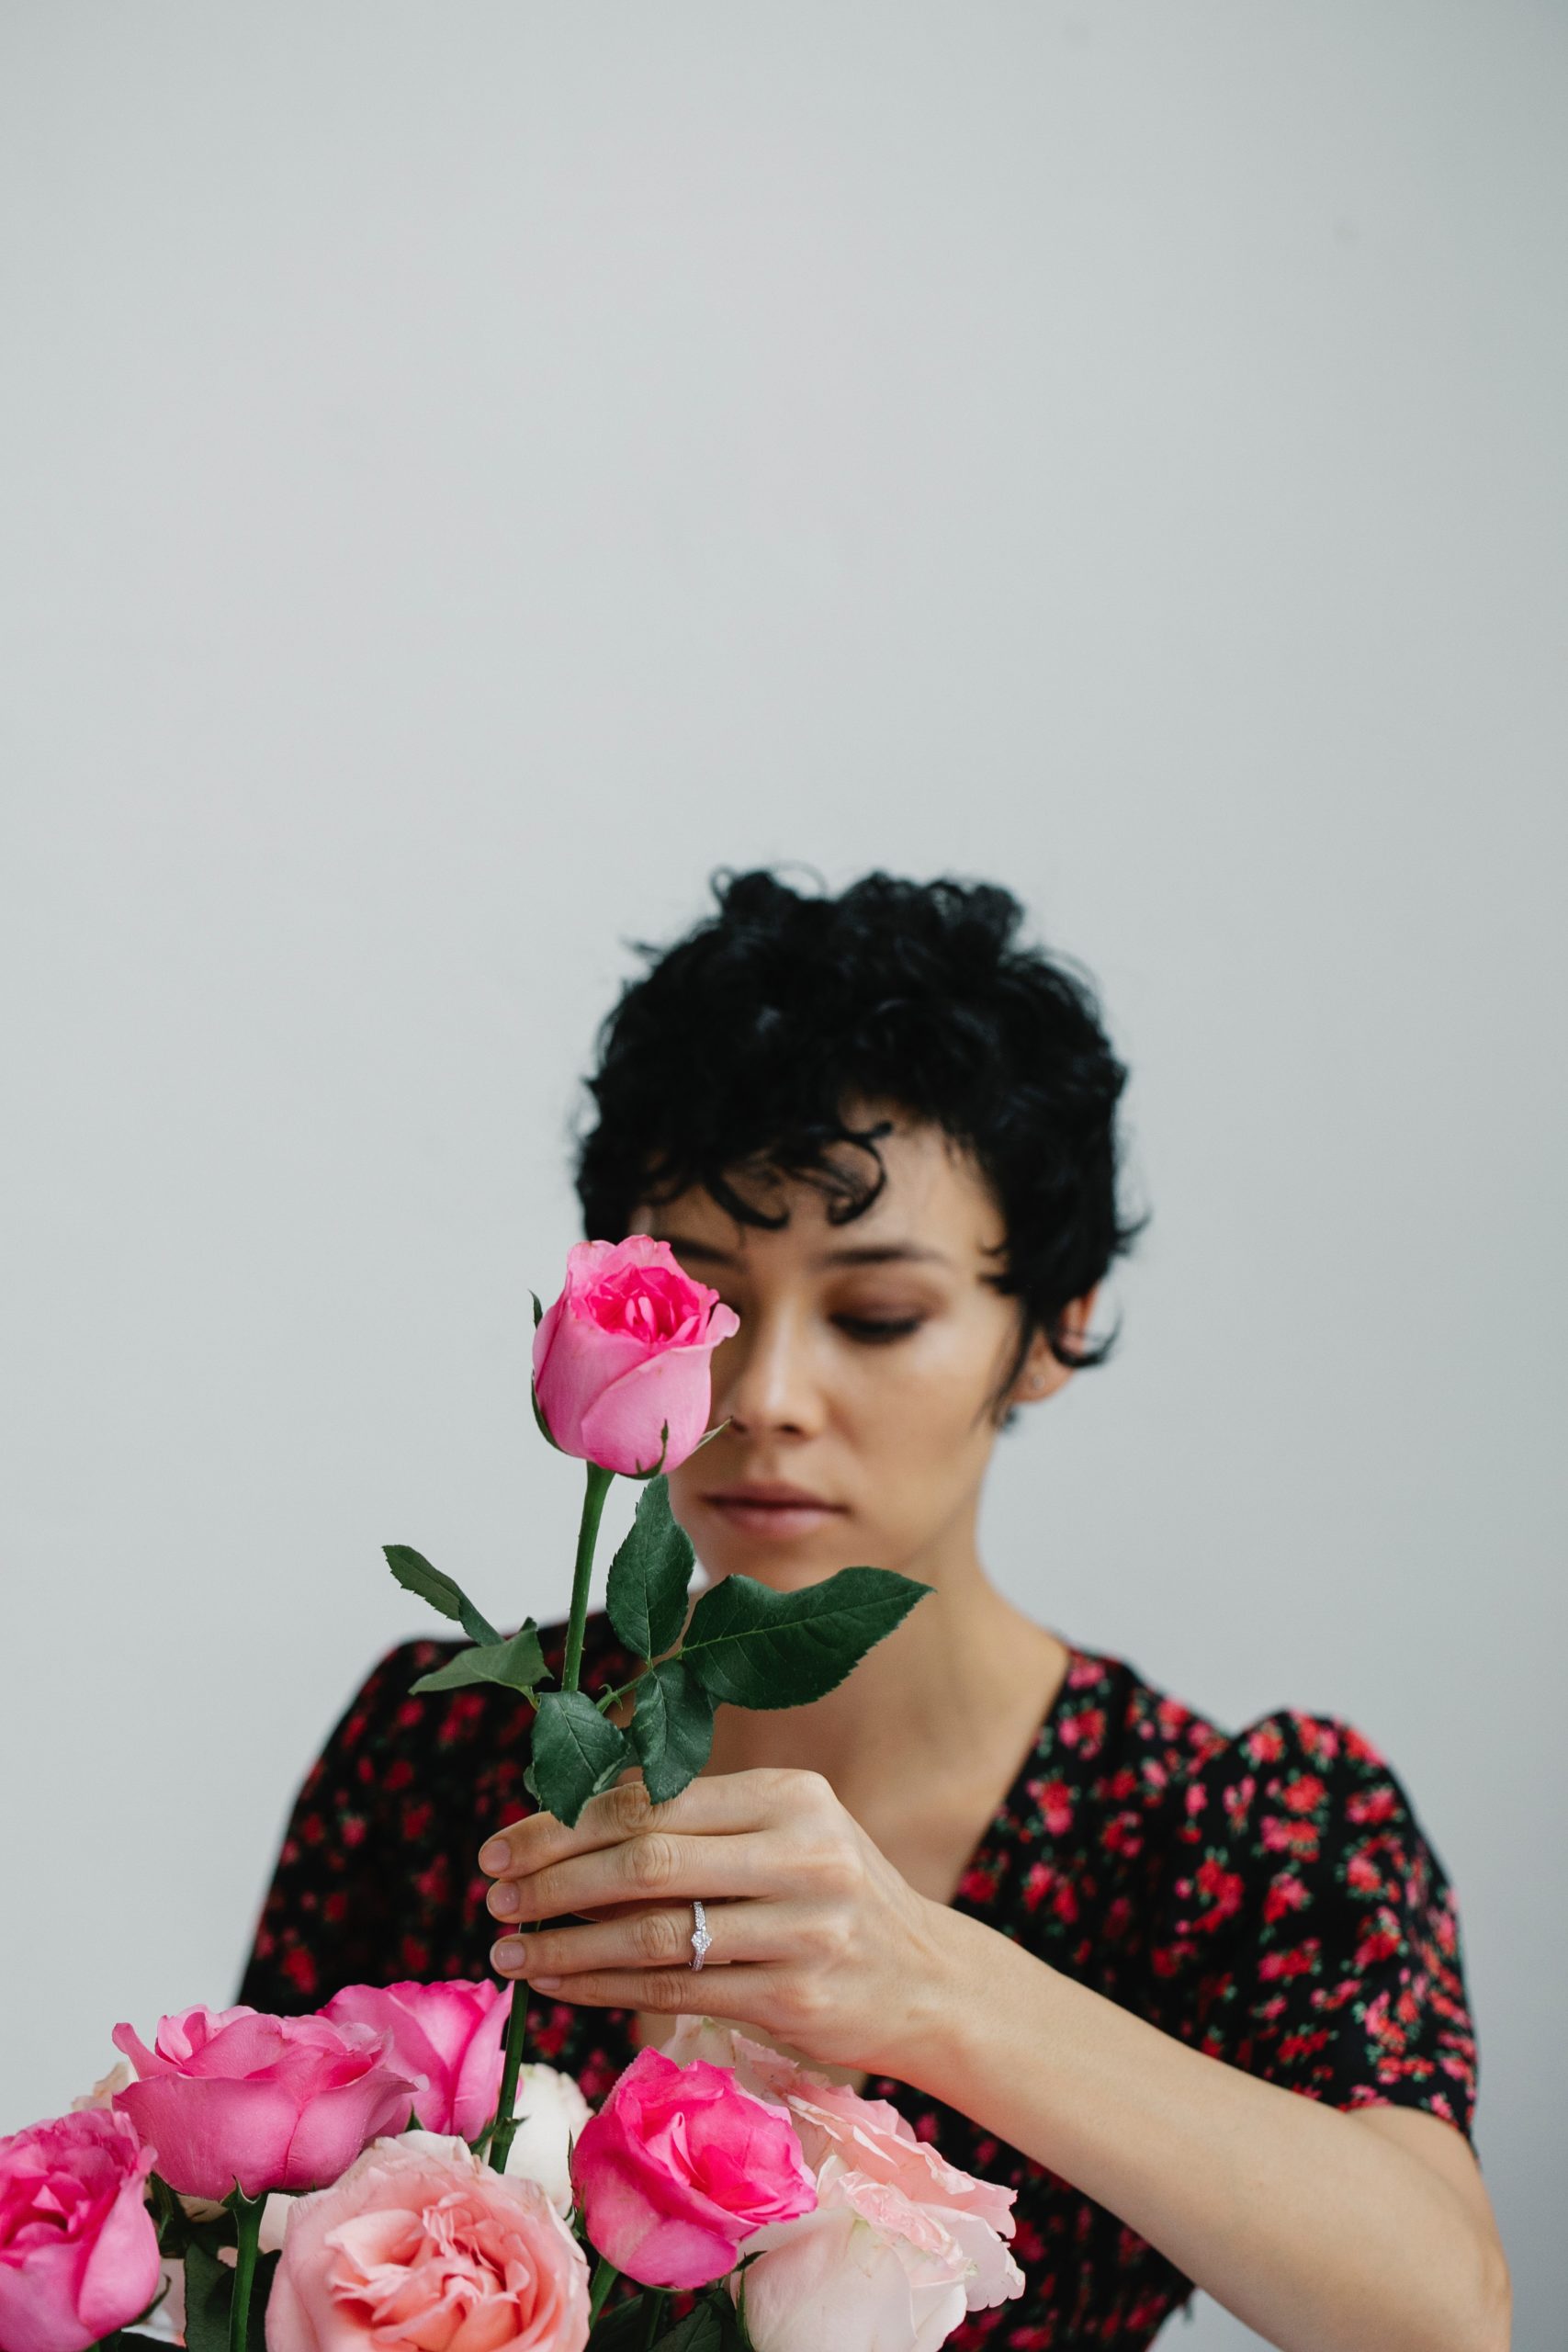 A woman arranges pink rose in a vase. Post includes tips for keeping a bouquet fresher for longer. Photo by Michelle Leman from Pexels